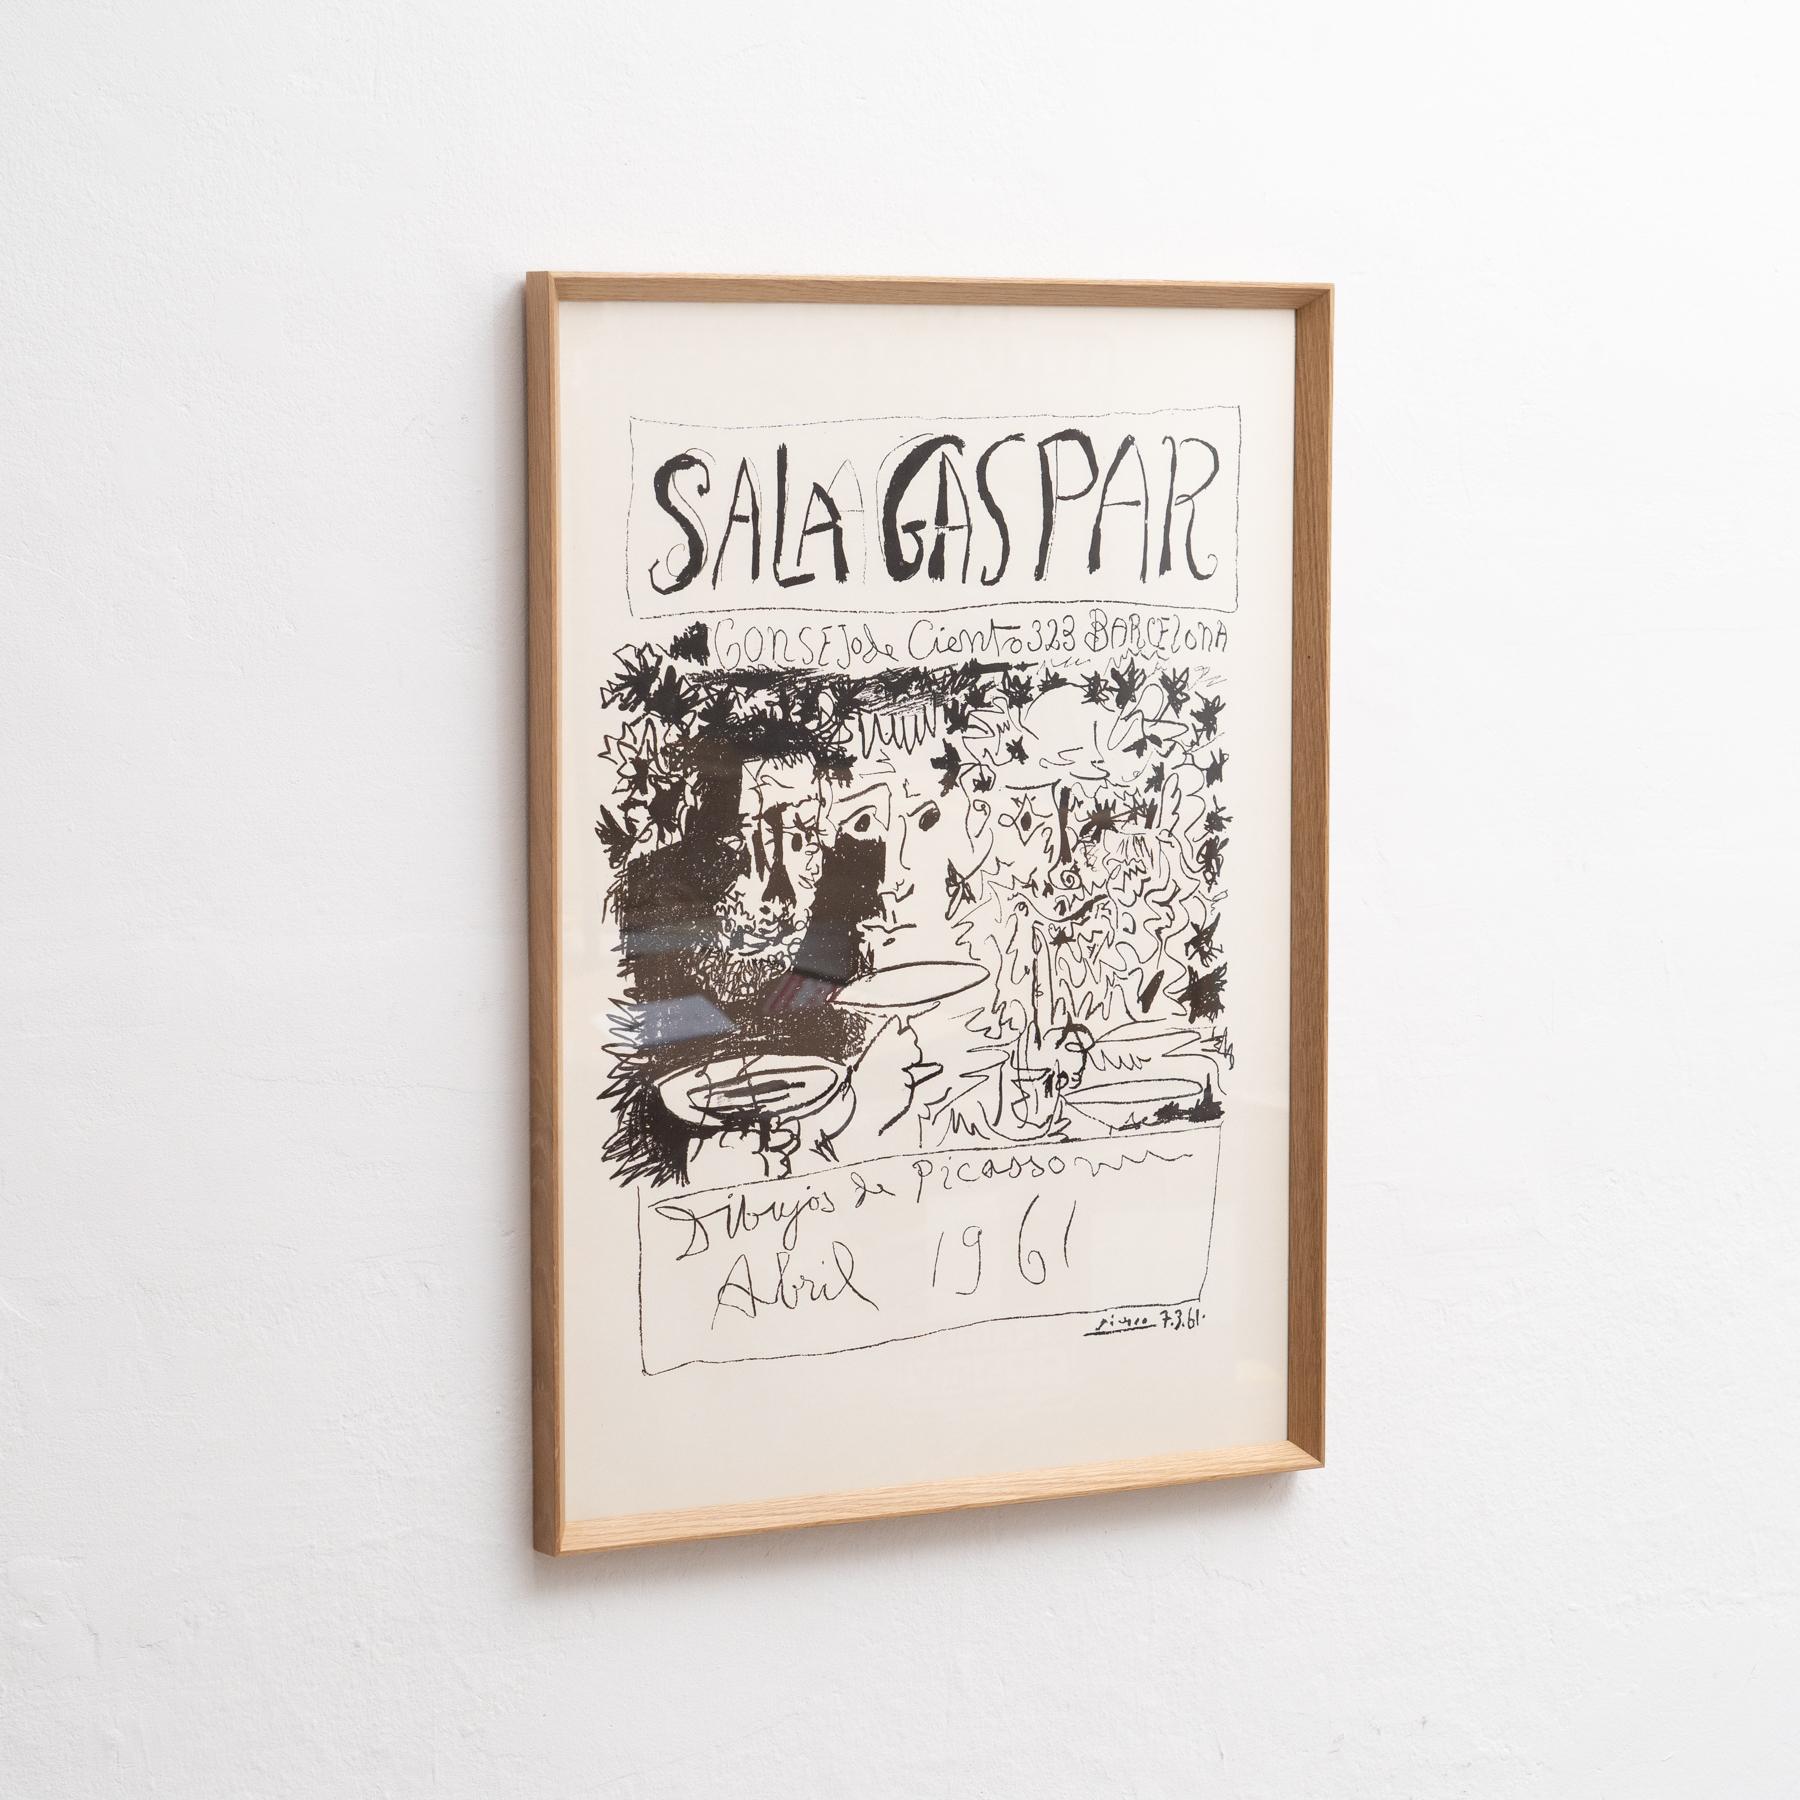 Spanish Historical Lithographic Framed Poster of Drawings by Picasso, circa 1961 For Sale